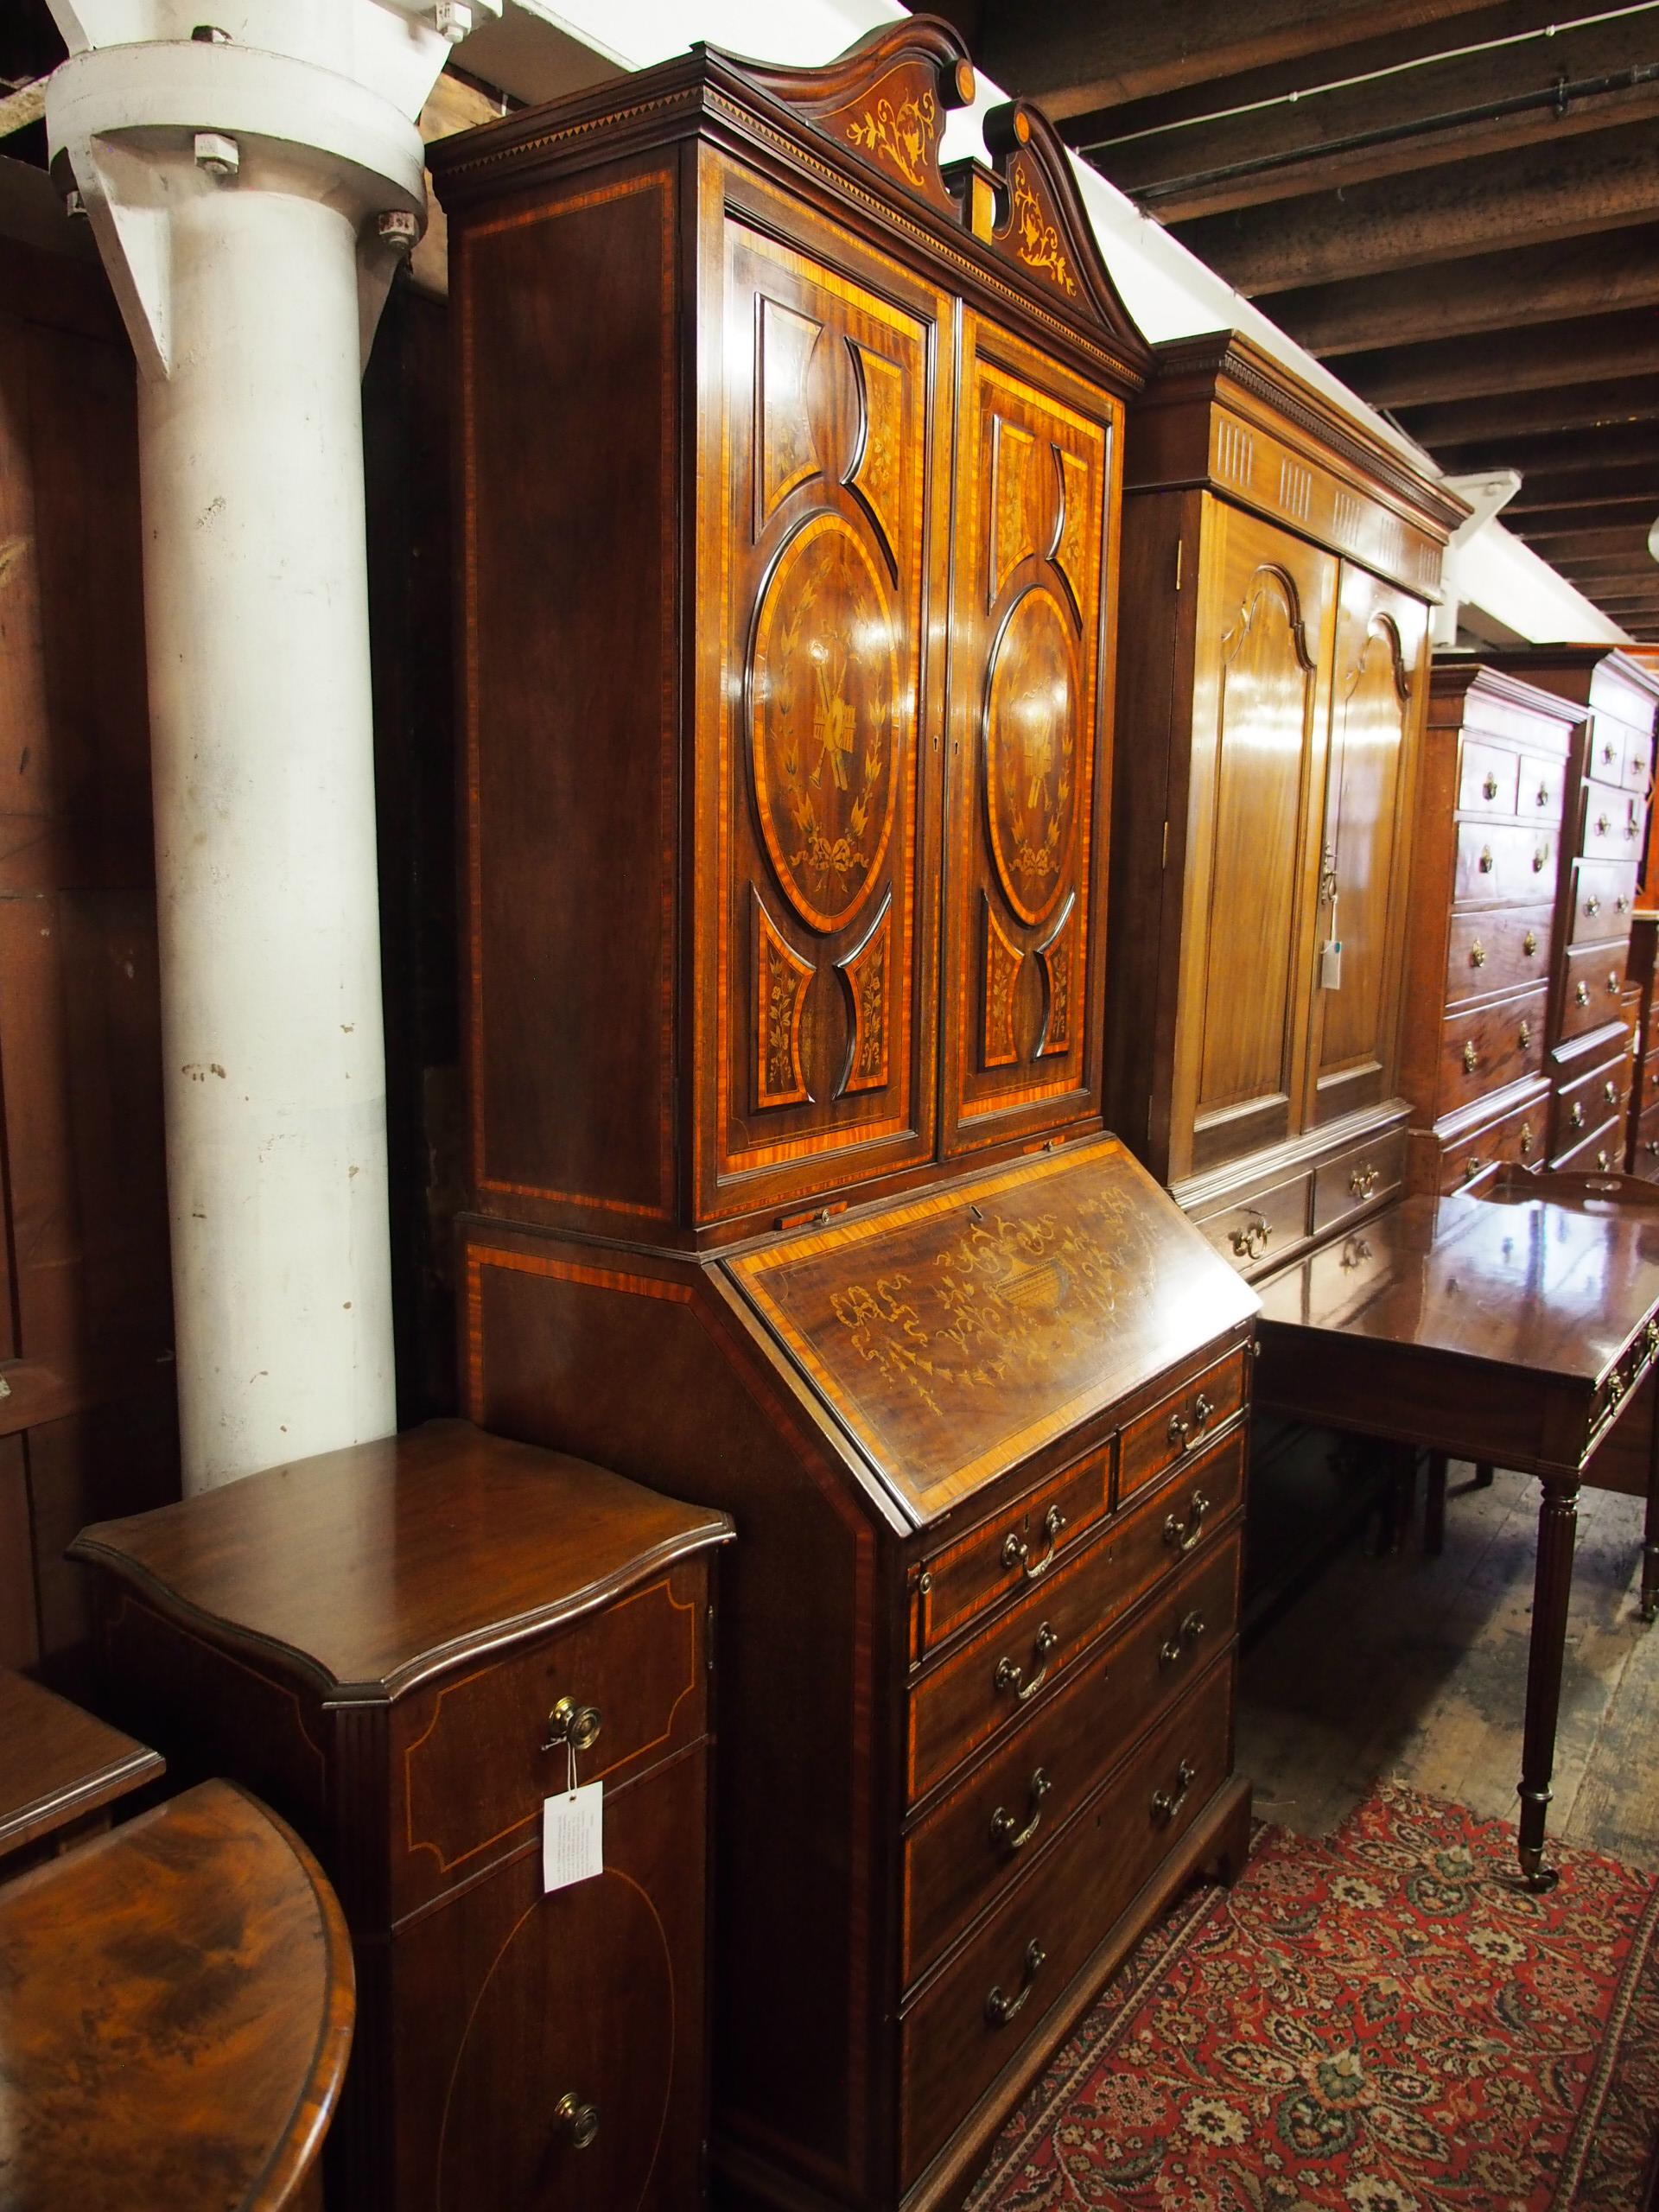 George III and later mahogany inlaid bureau bookcase, circa 1820. The top has an architectural pediment with foliate panels left and right and a diamond satinwood and ebony inlaid cornice. Below this are two doors with raised marquetry panels, with